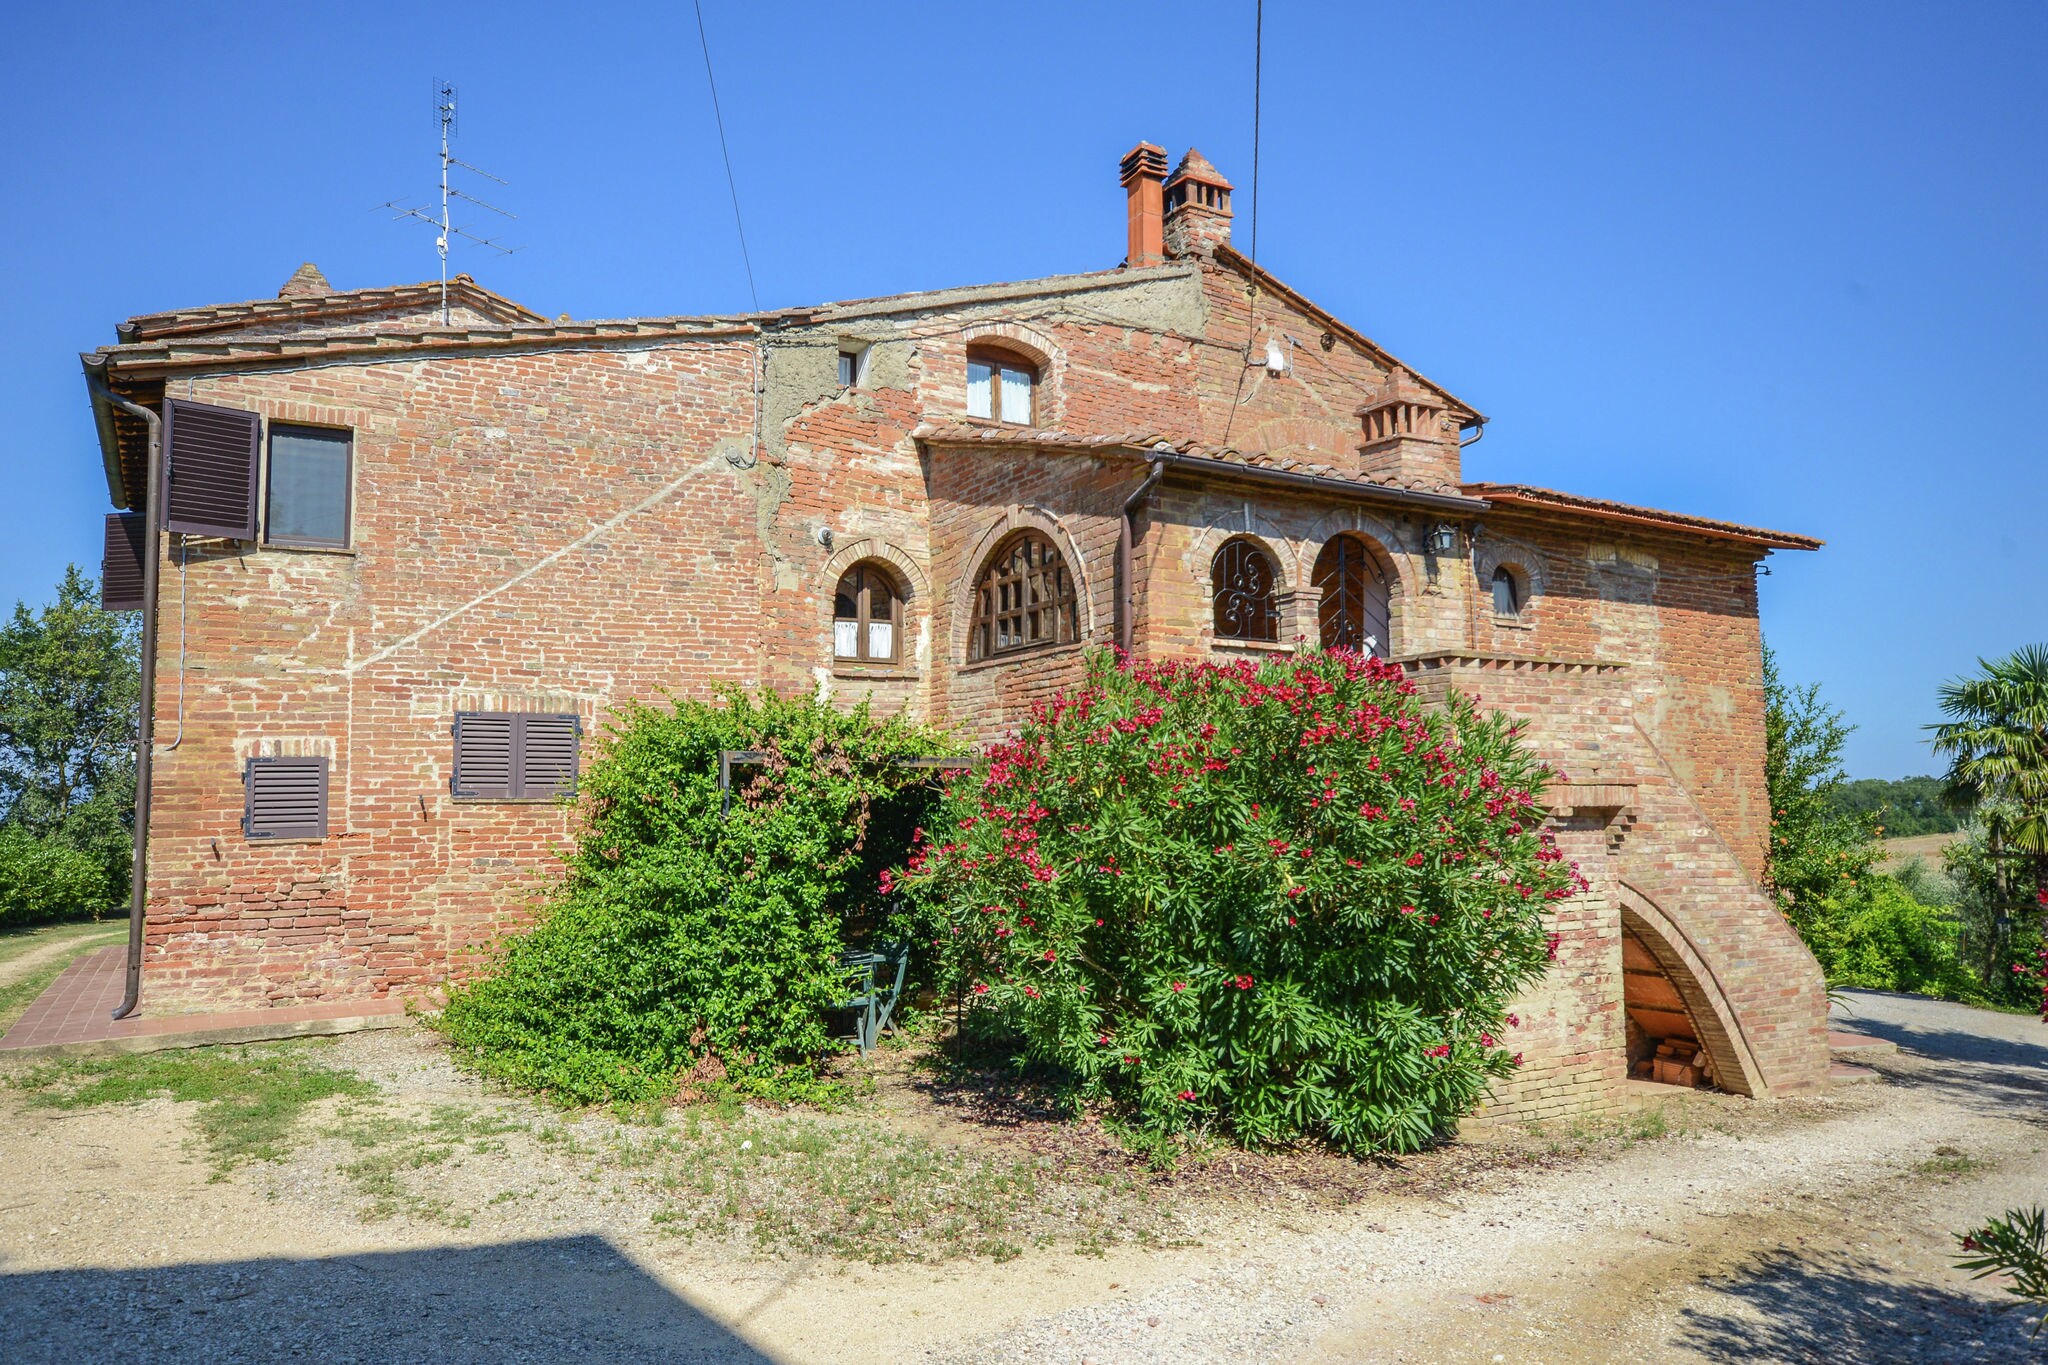 Antique, 6 persons accommodation in small citadel.